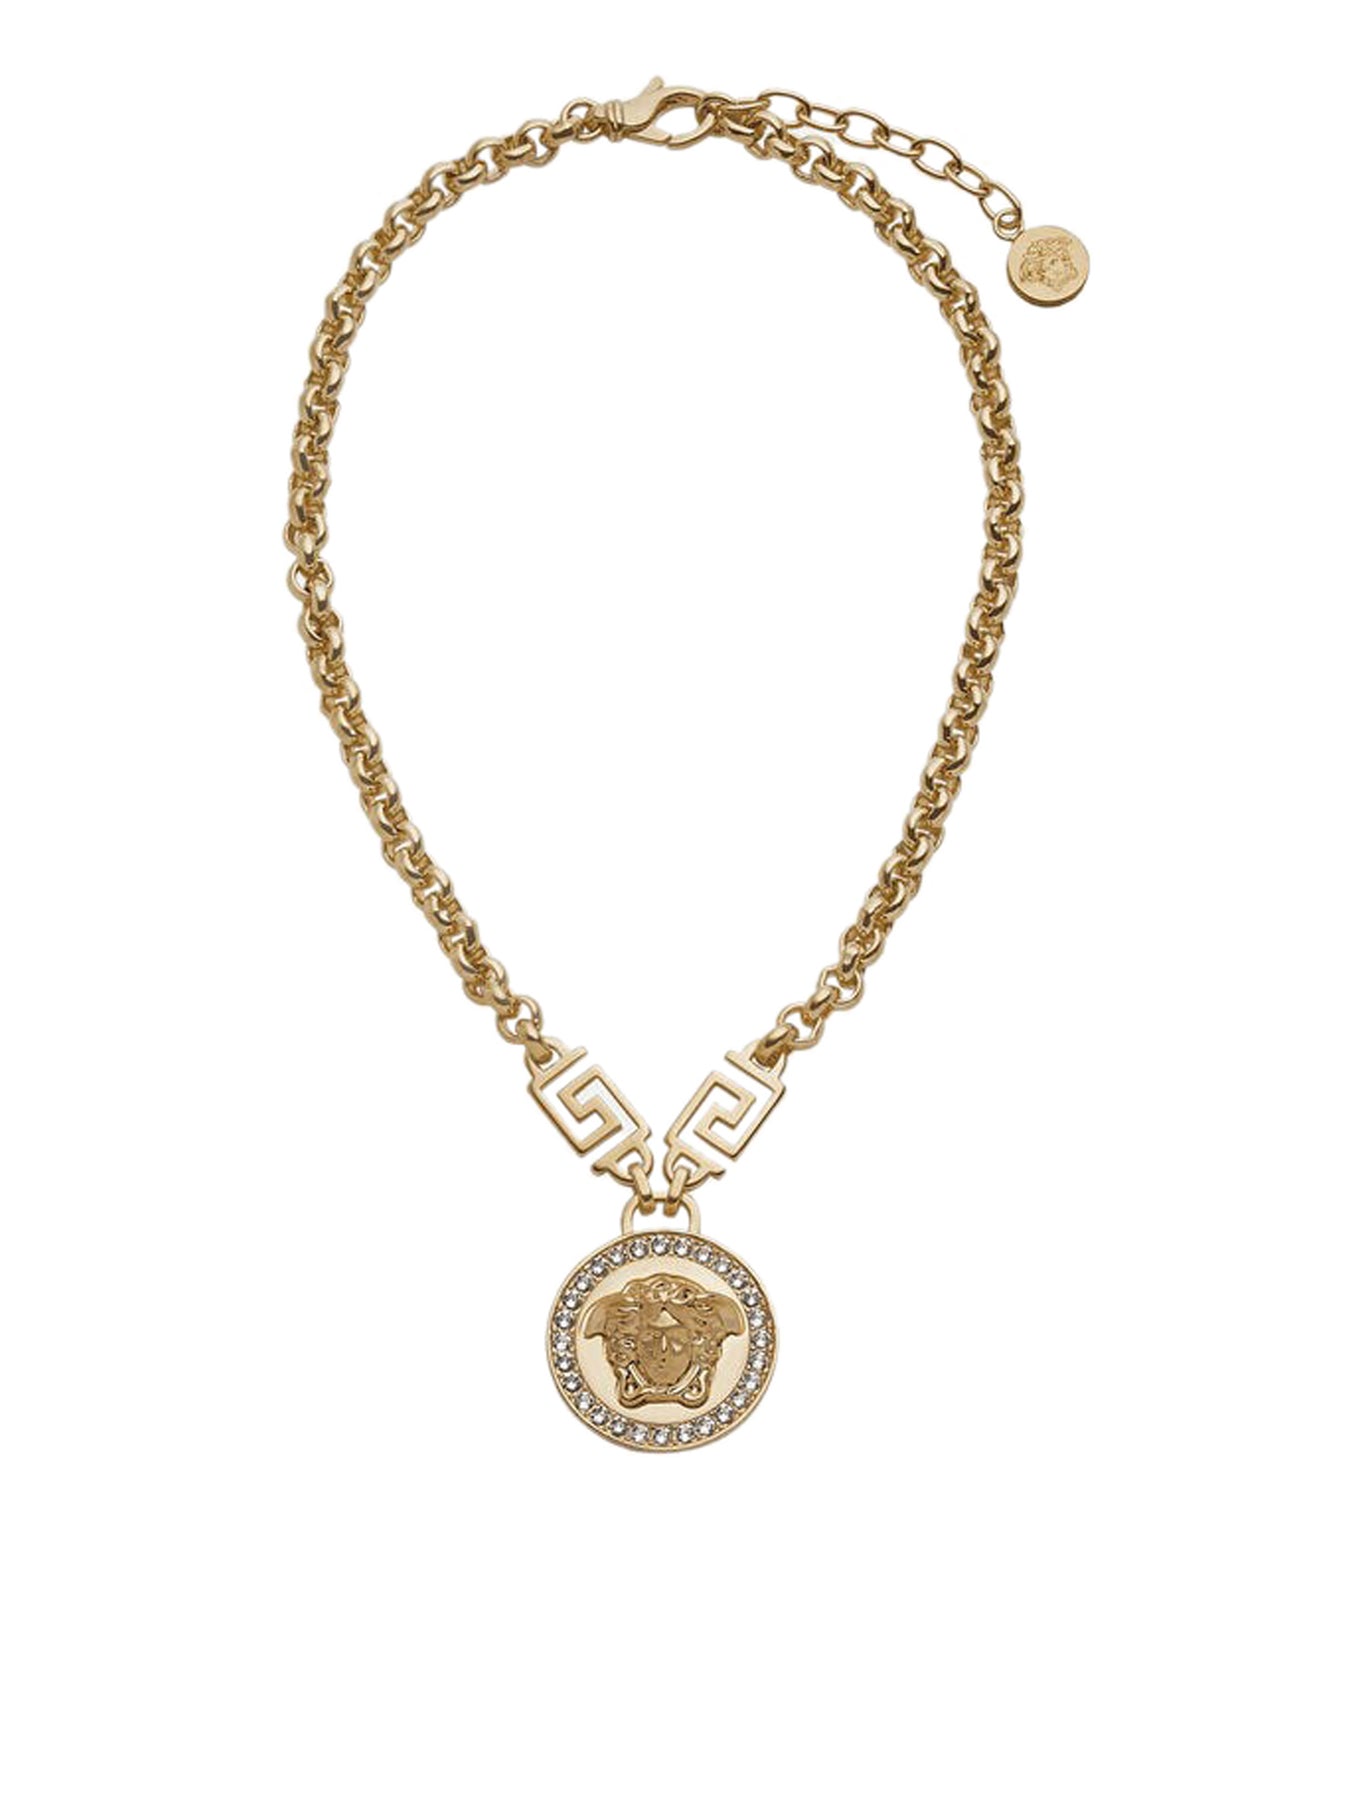 THE GREEK MEDUSA NECKLACE WITH CRYSTALS